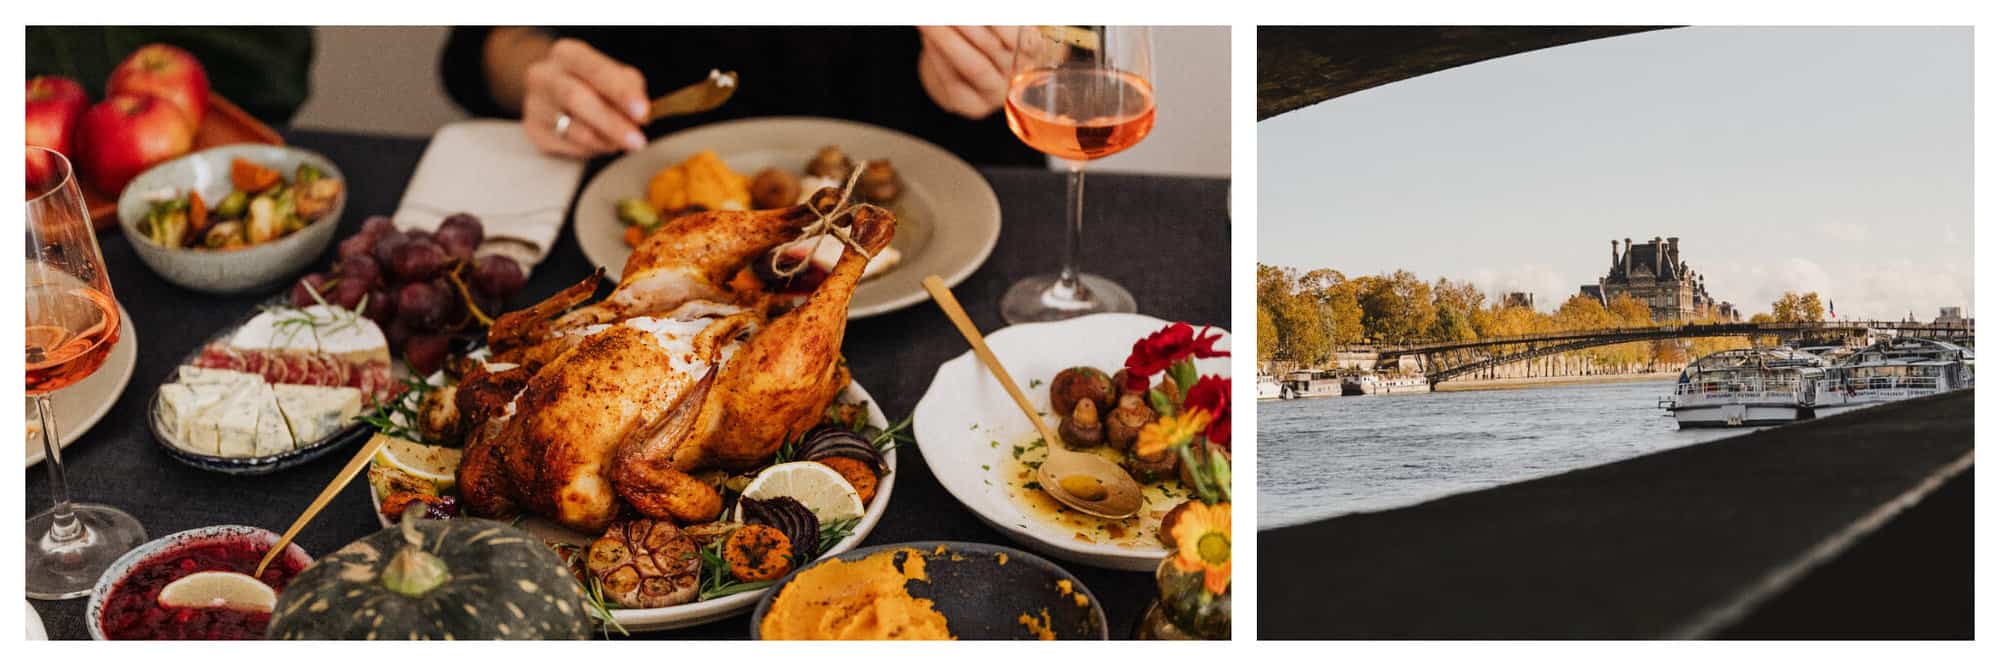 Left: A classic Thanksgiving table with roasted turkey, vegetable, pumpkin soup, cranberry sauce, and wine. Left: A picture of the Parisian skyline taken from under a bridge by the Seine.